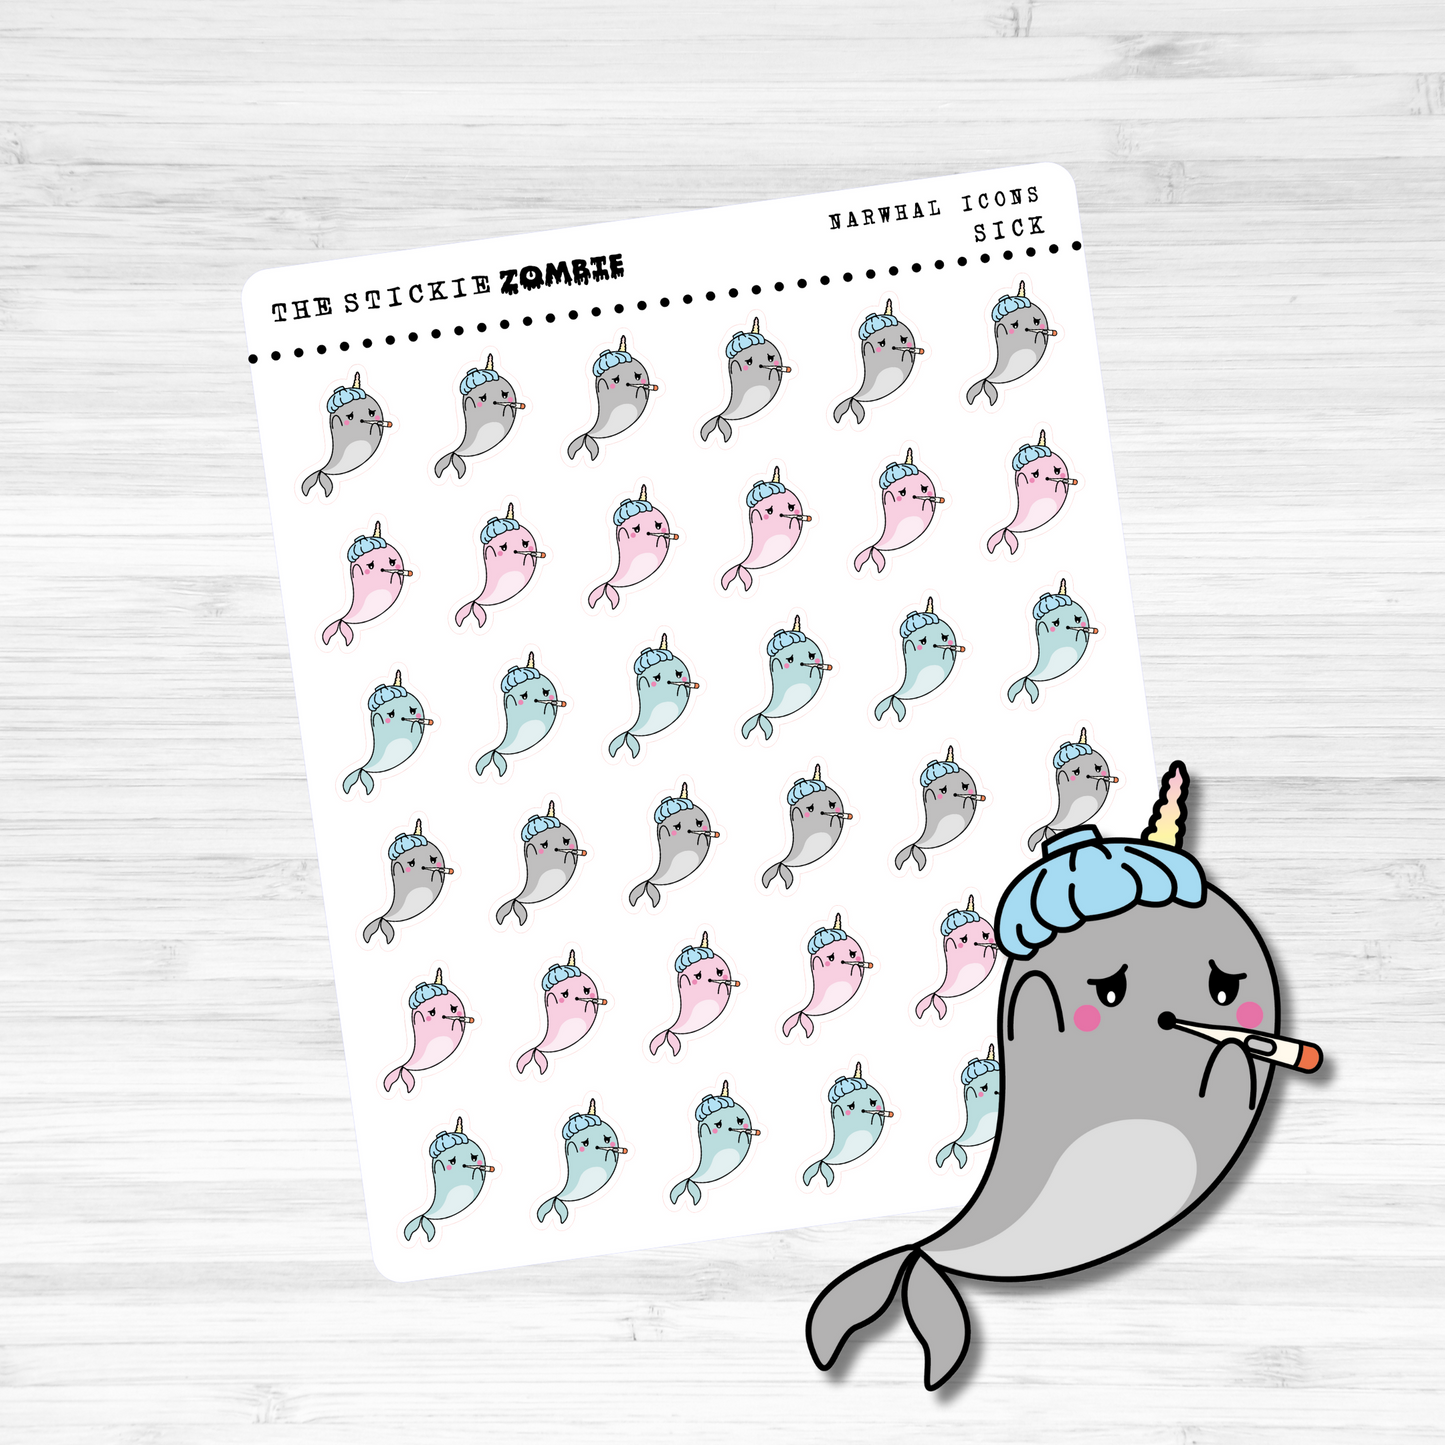 Icons / Narwhal / Sick